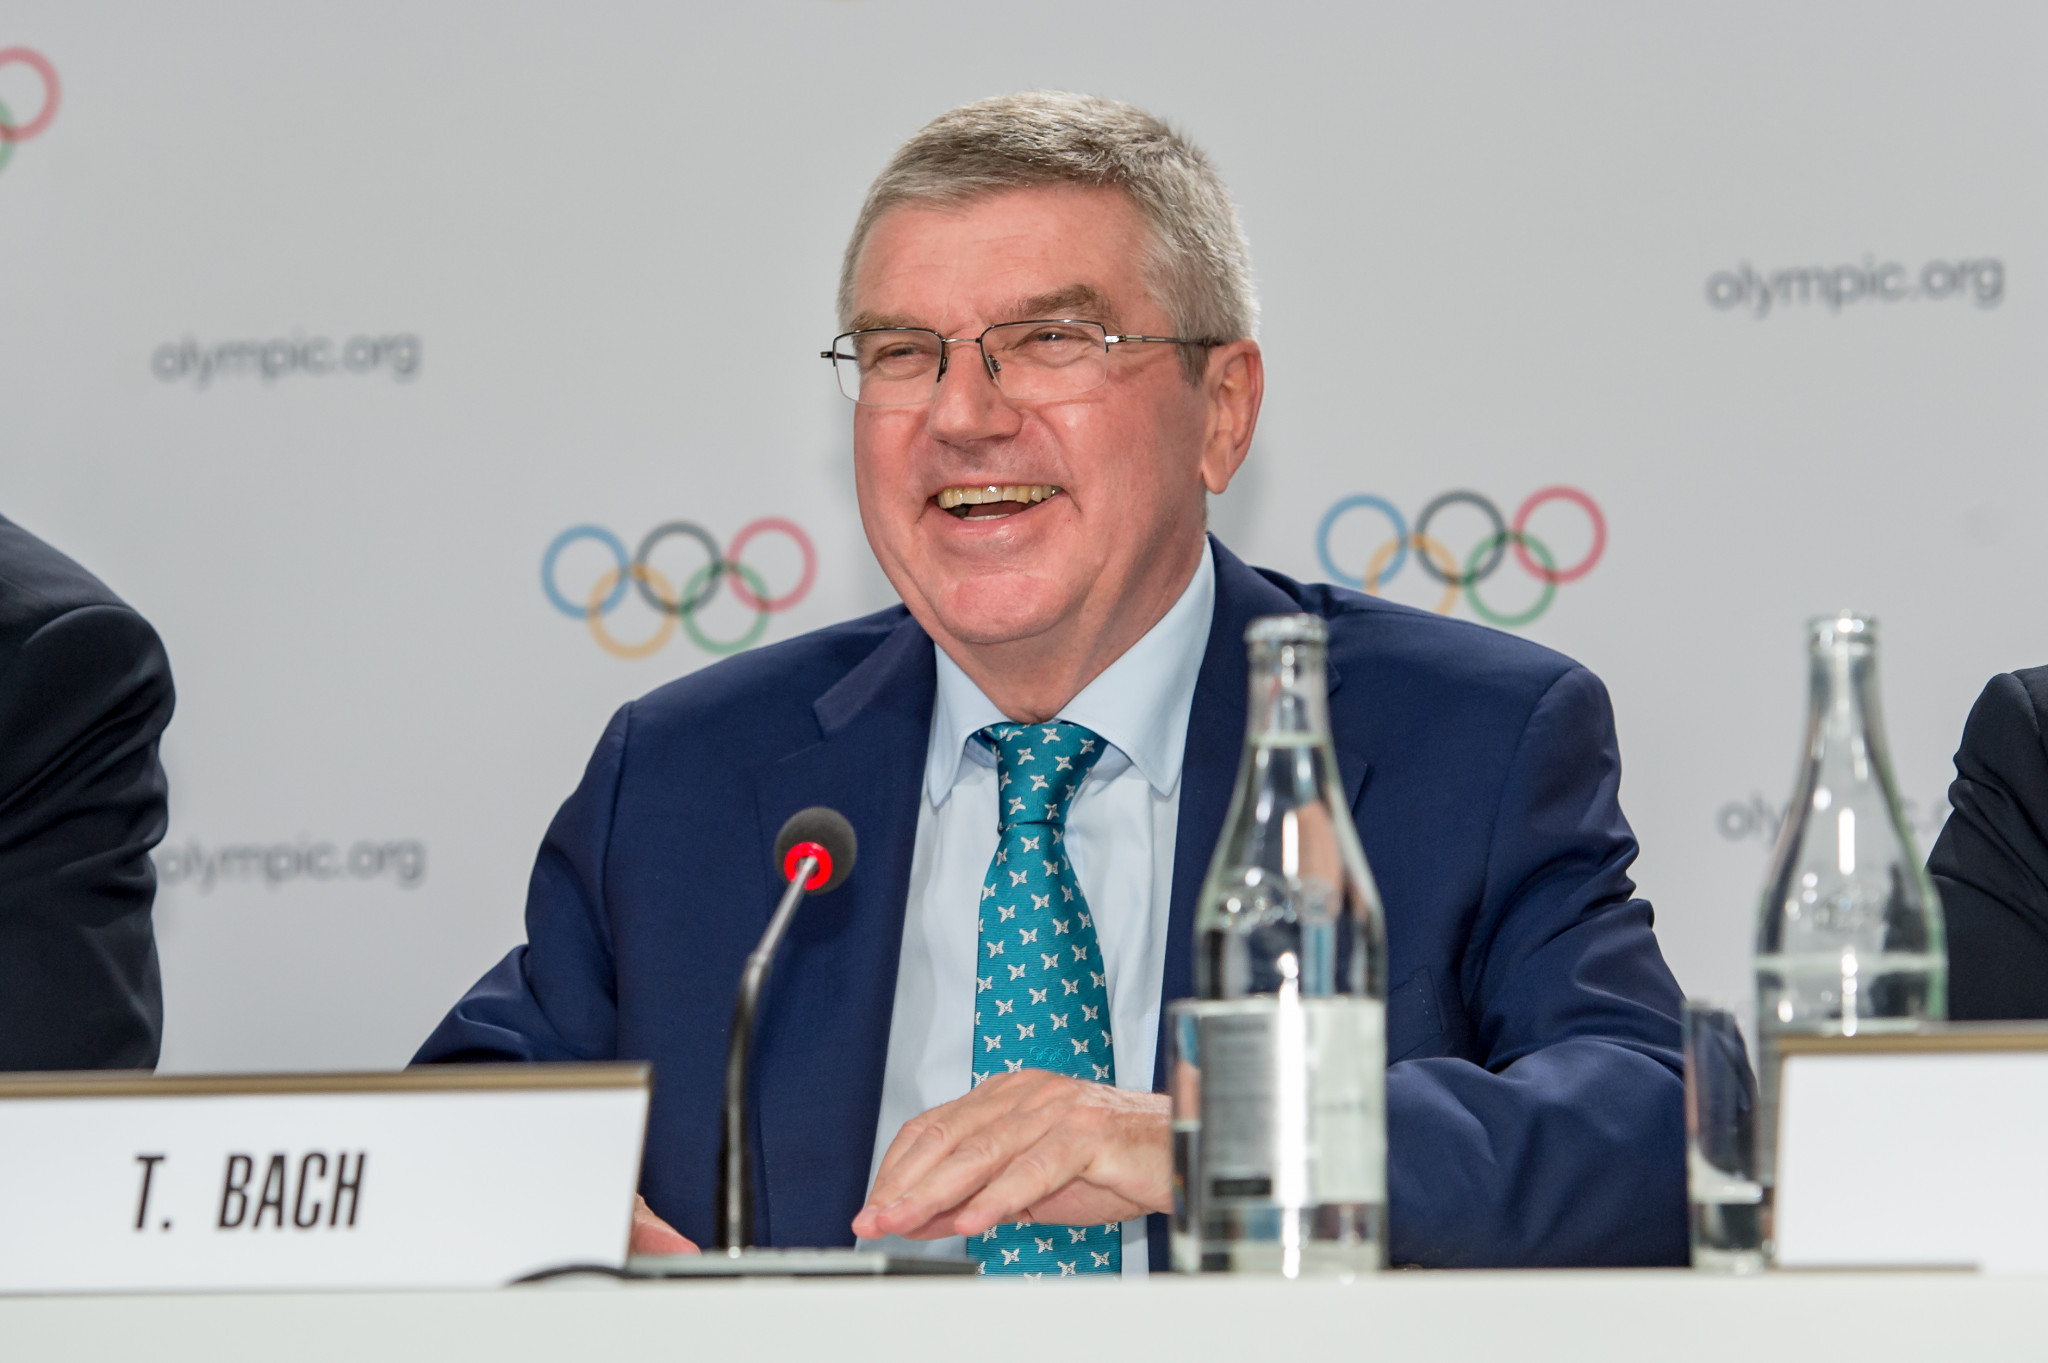 IOC President Thomas Bach opened the door for the heads of the IAAF and FIFA to be elected as members next year ©Getty Images